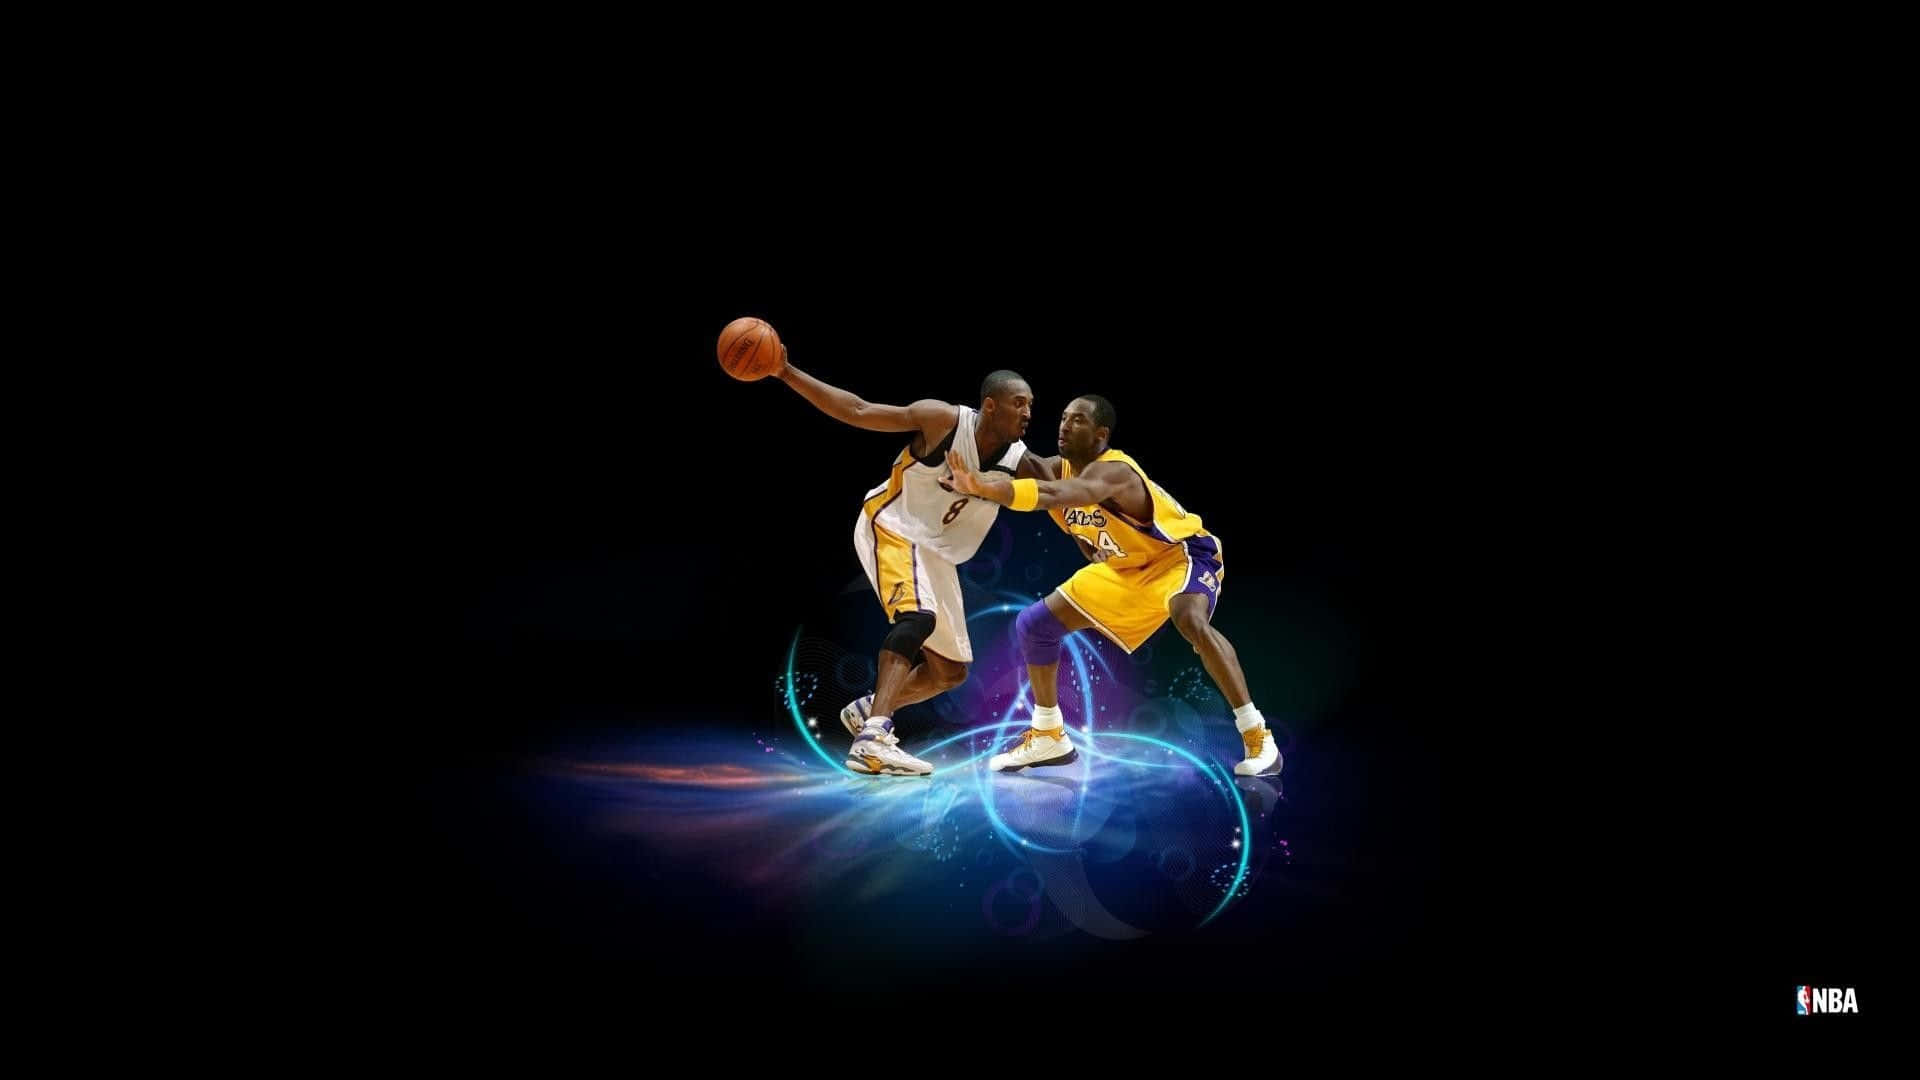 Best Basketball Players Background